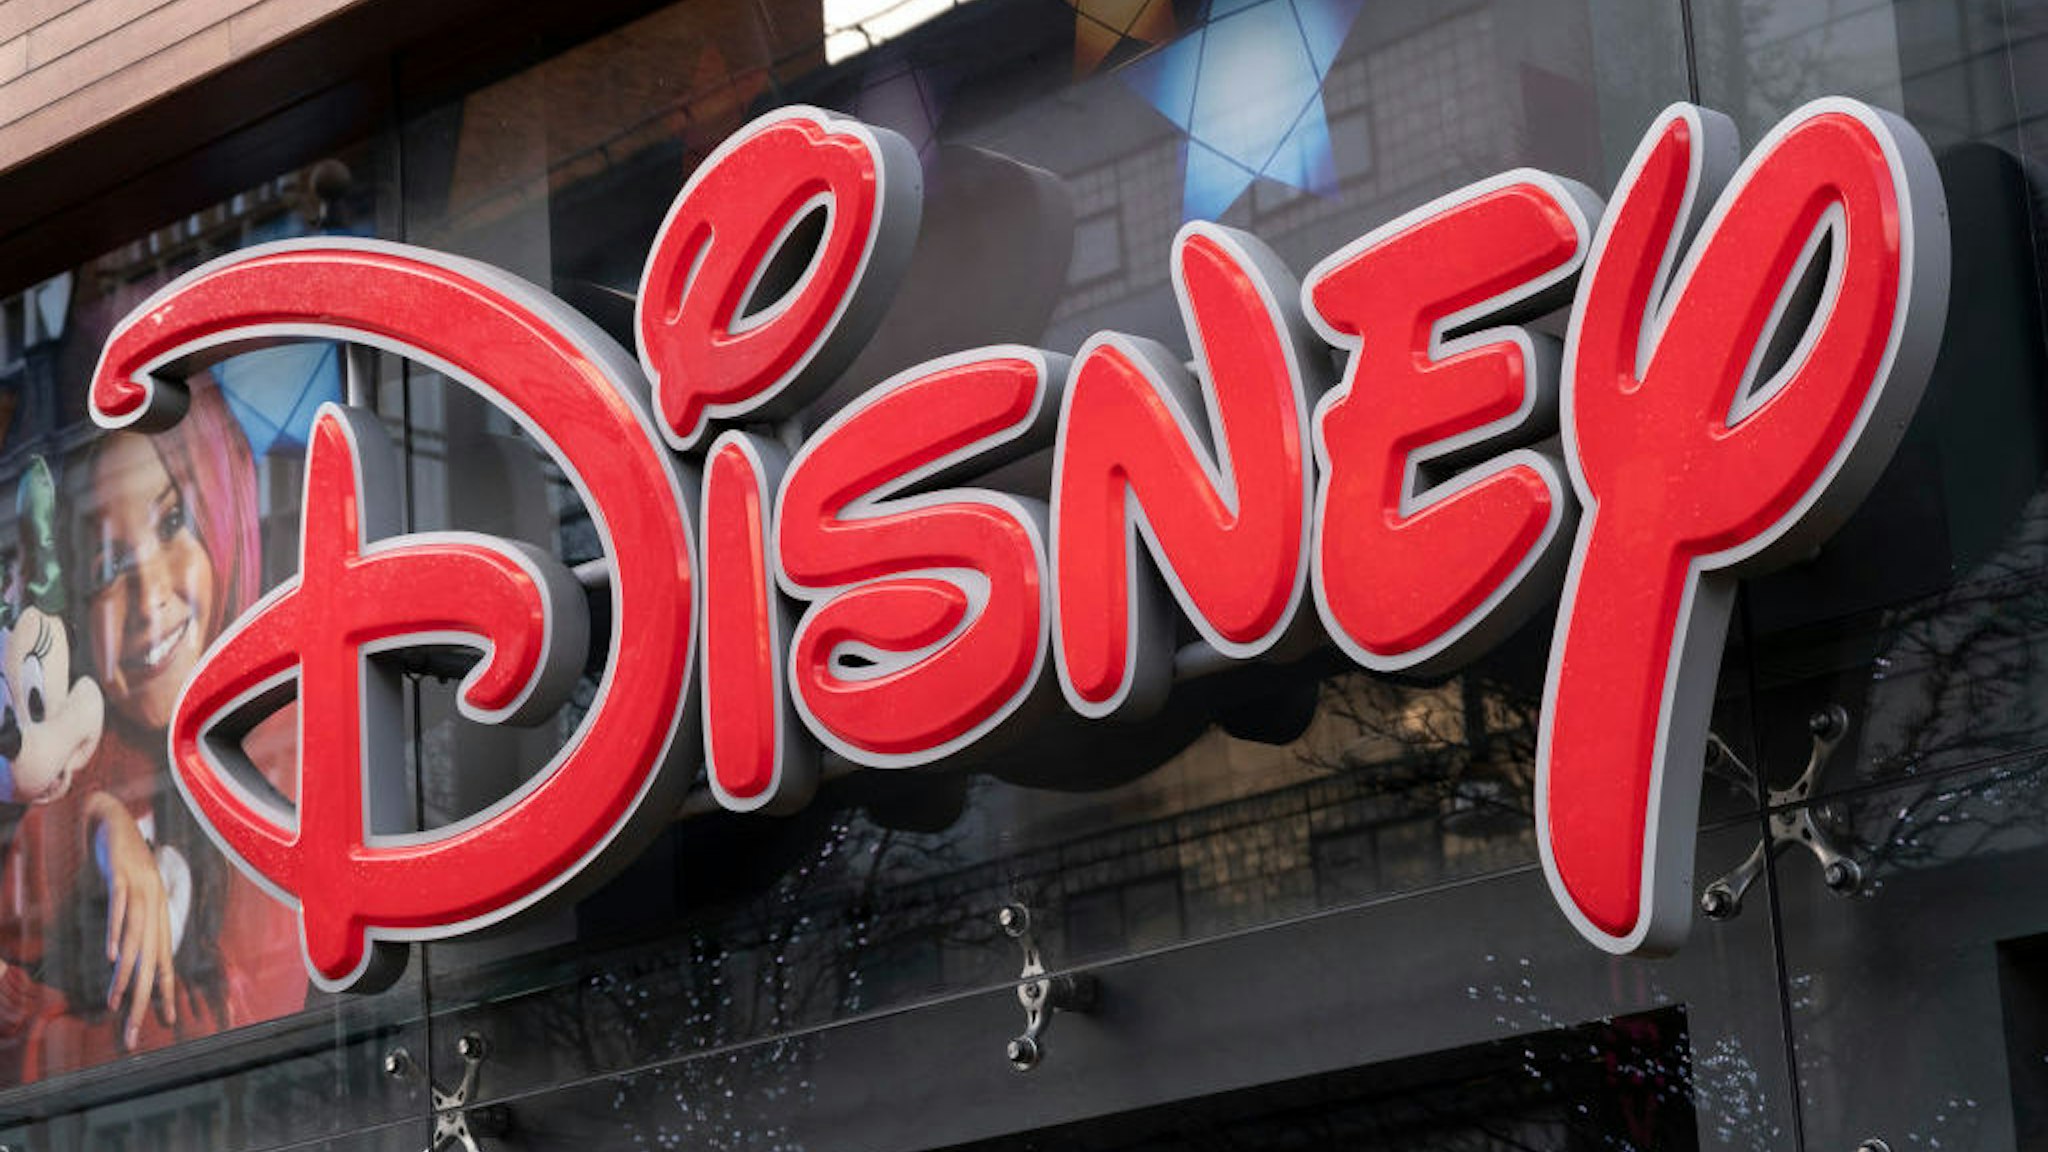 Sign for the media brand Disney Store on 19th December 2020 in London, United Kingdom. The Walt Disney Company, commonly known as Walt Disney or simply Disney, is an American diversified multinational mass media and entertainment conglomerate. (photo by Mike Kemp/In Pictures via Getty Images)